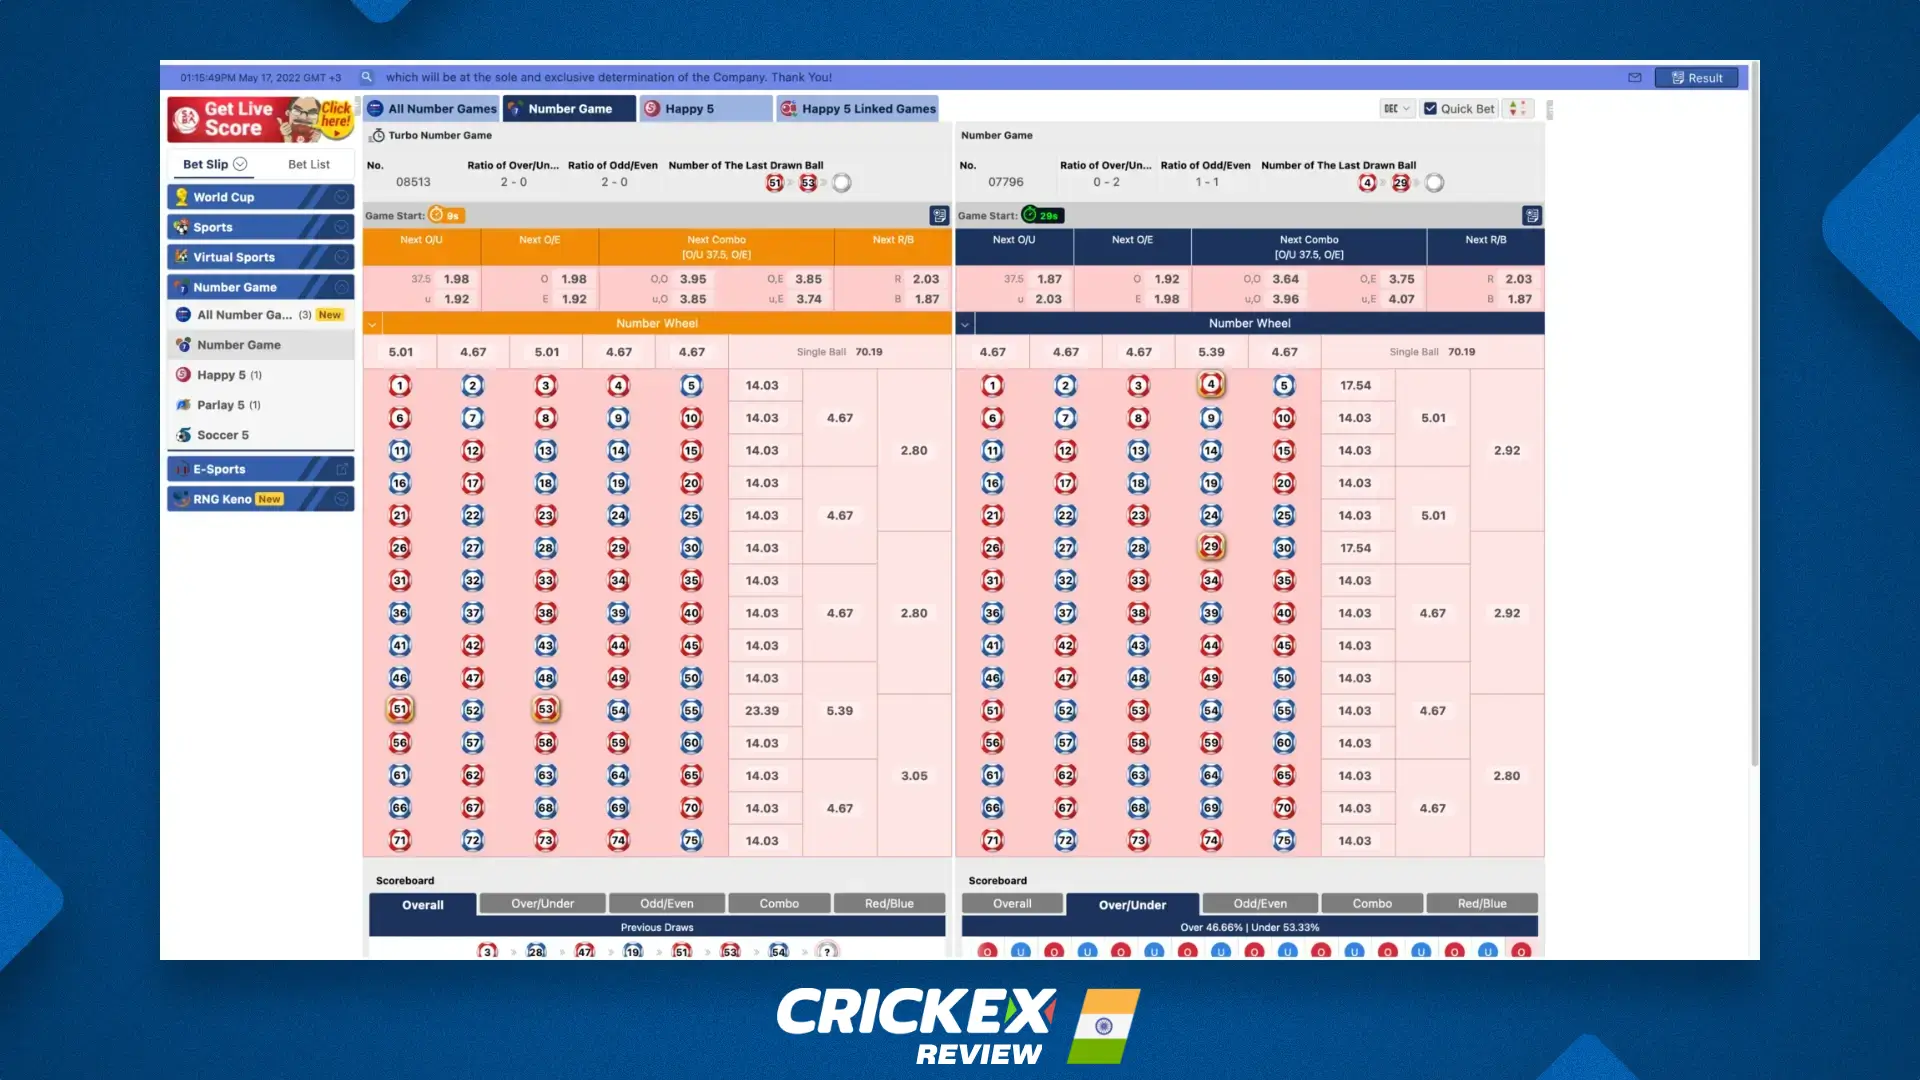 Online lotteries are available to Crickex users in India